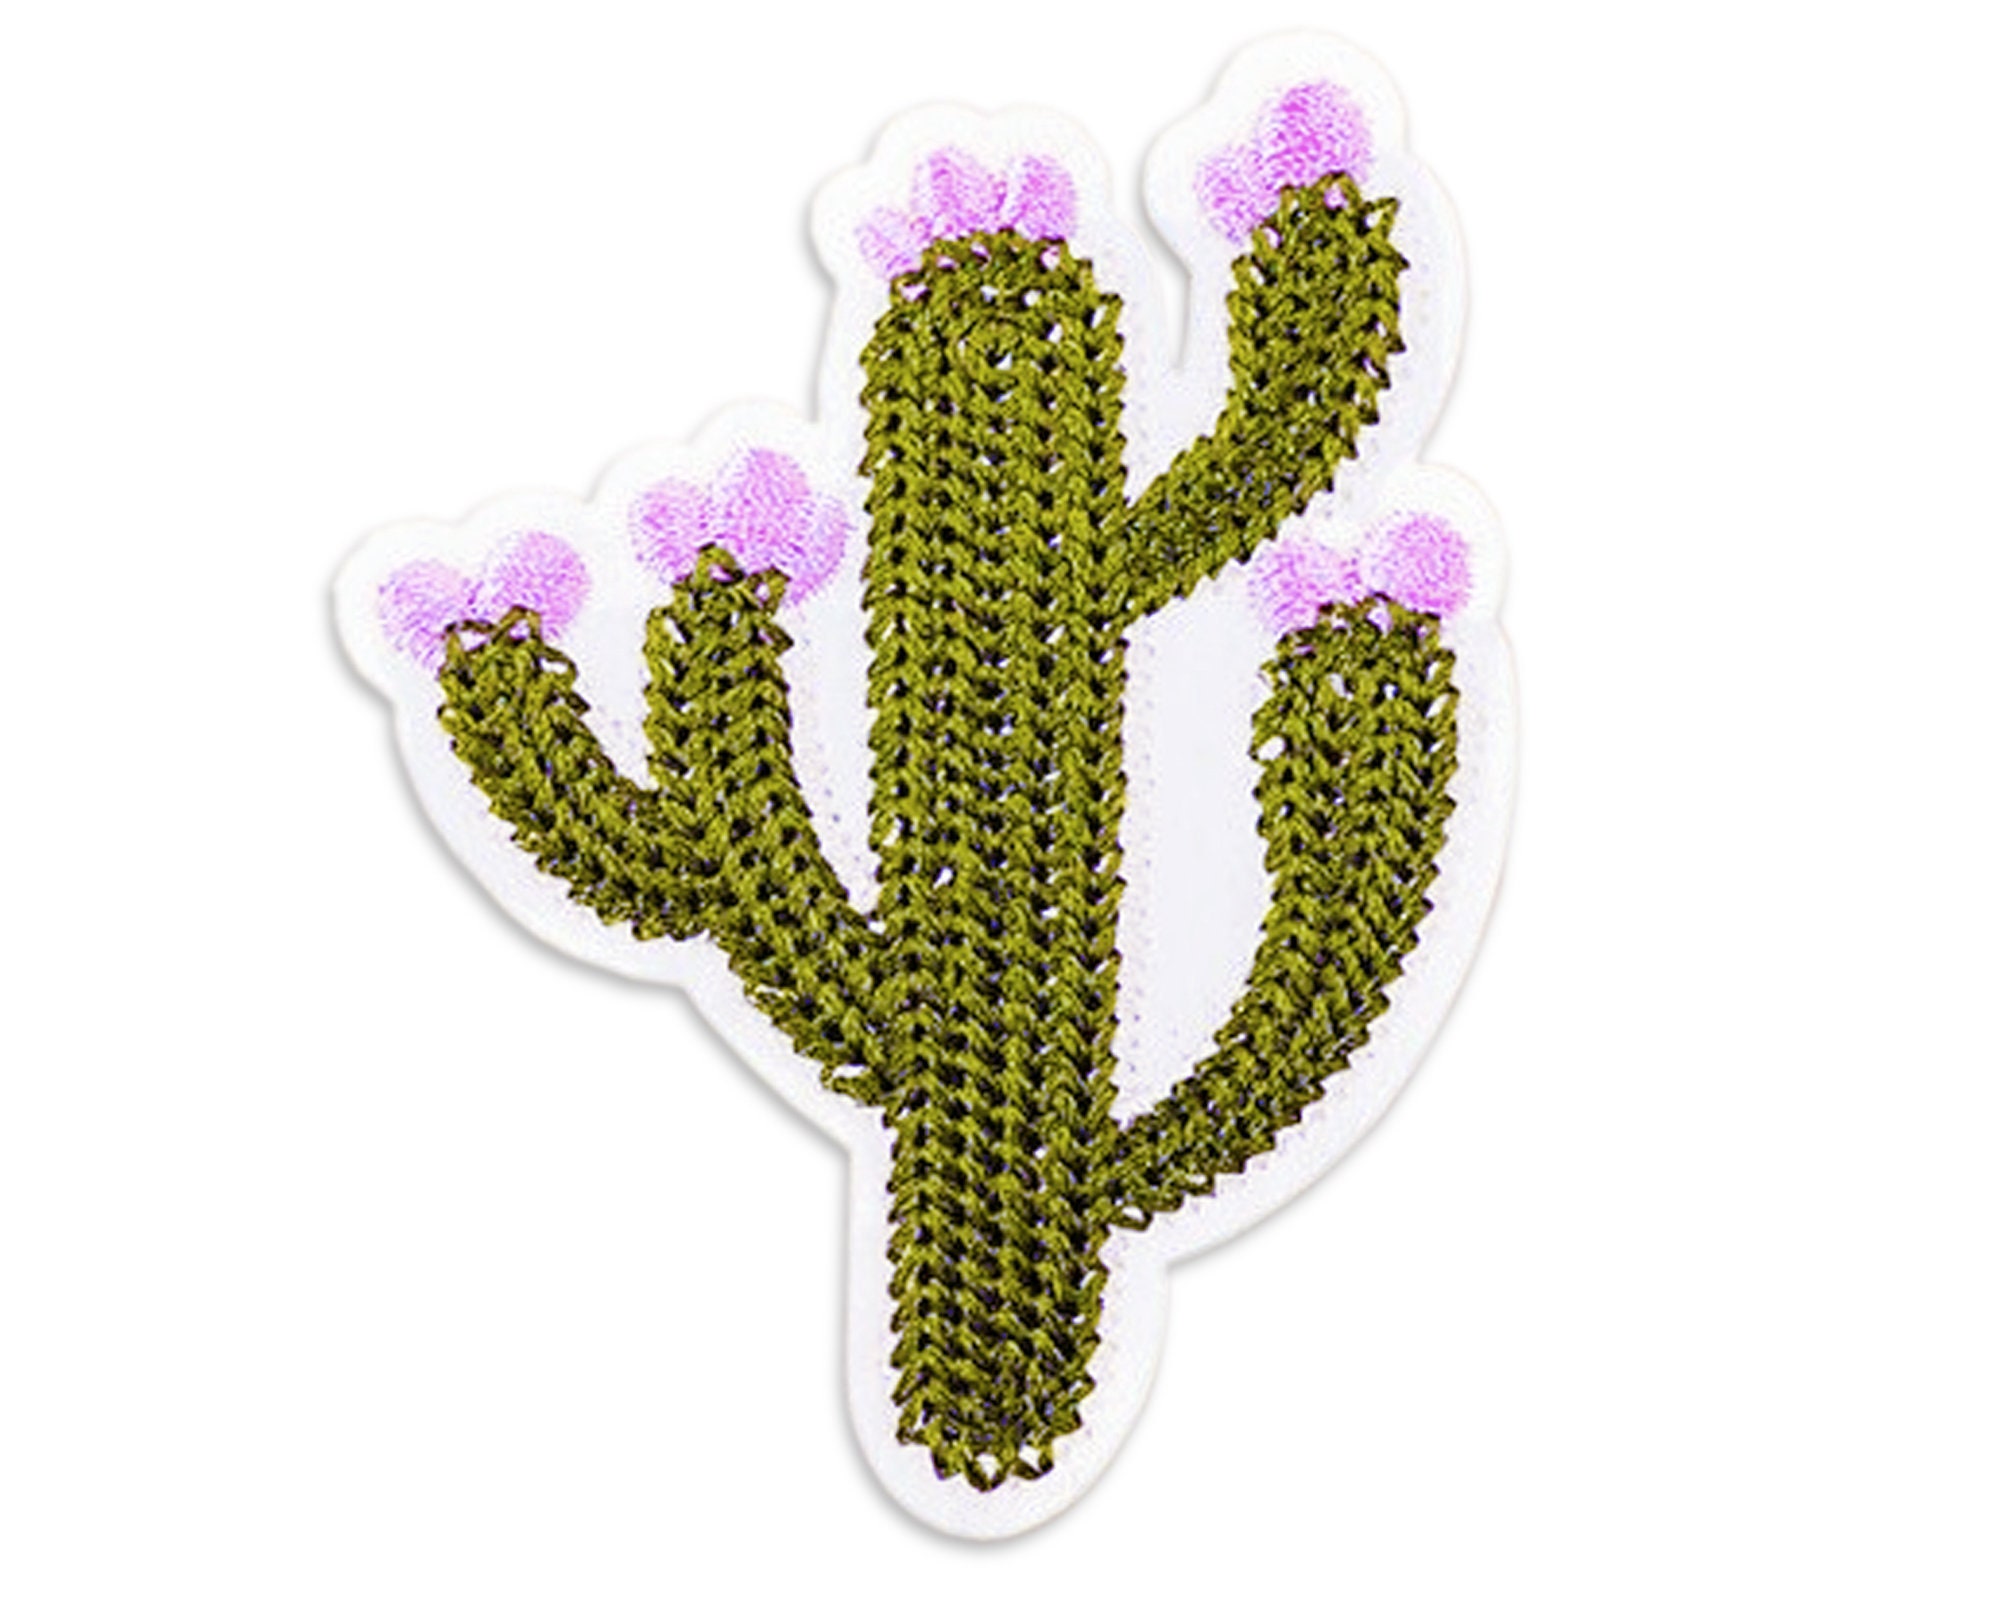 Black Cactus Iron on Patch, Size: 2 Wide x 3.5 Tall